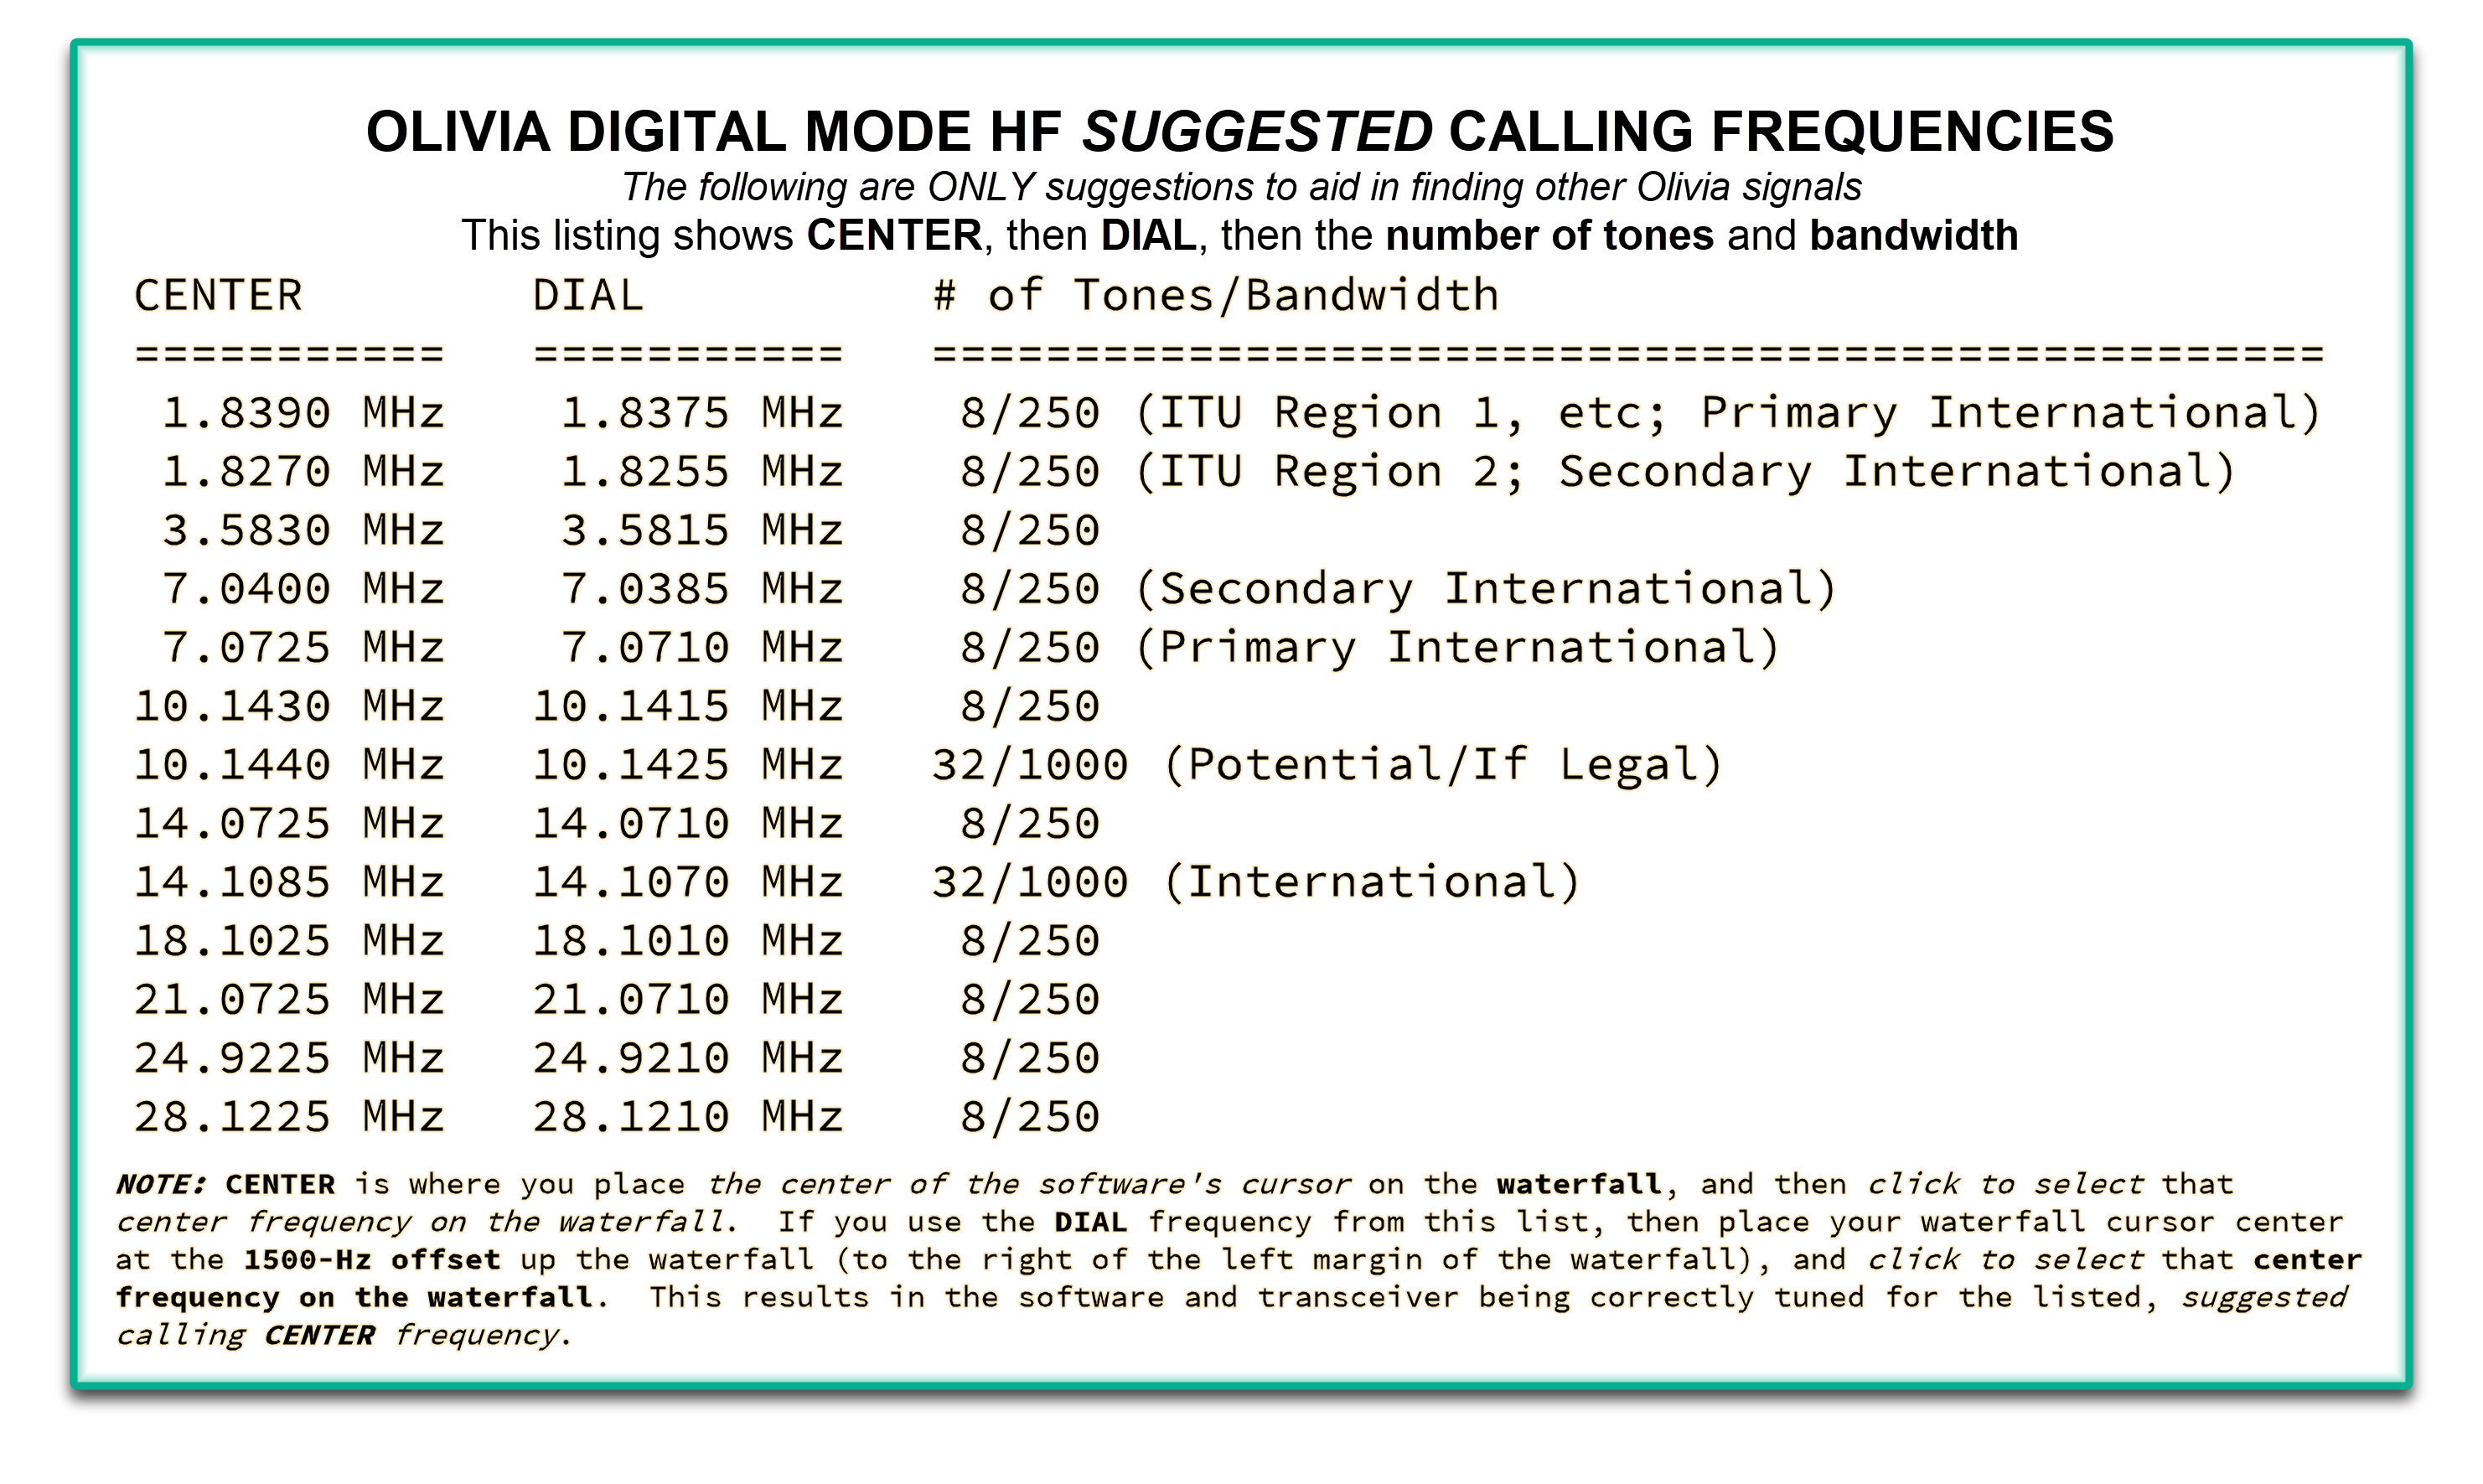 Suggested Frequencies - Olivia Digital Communication on HF